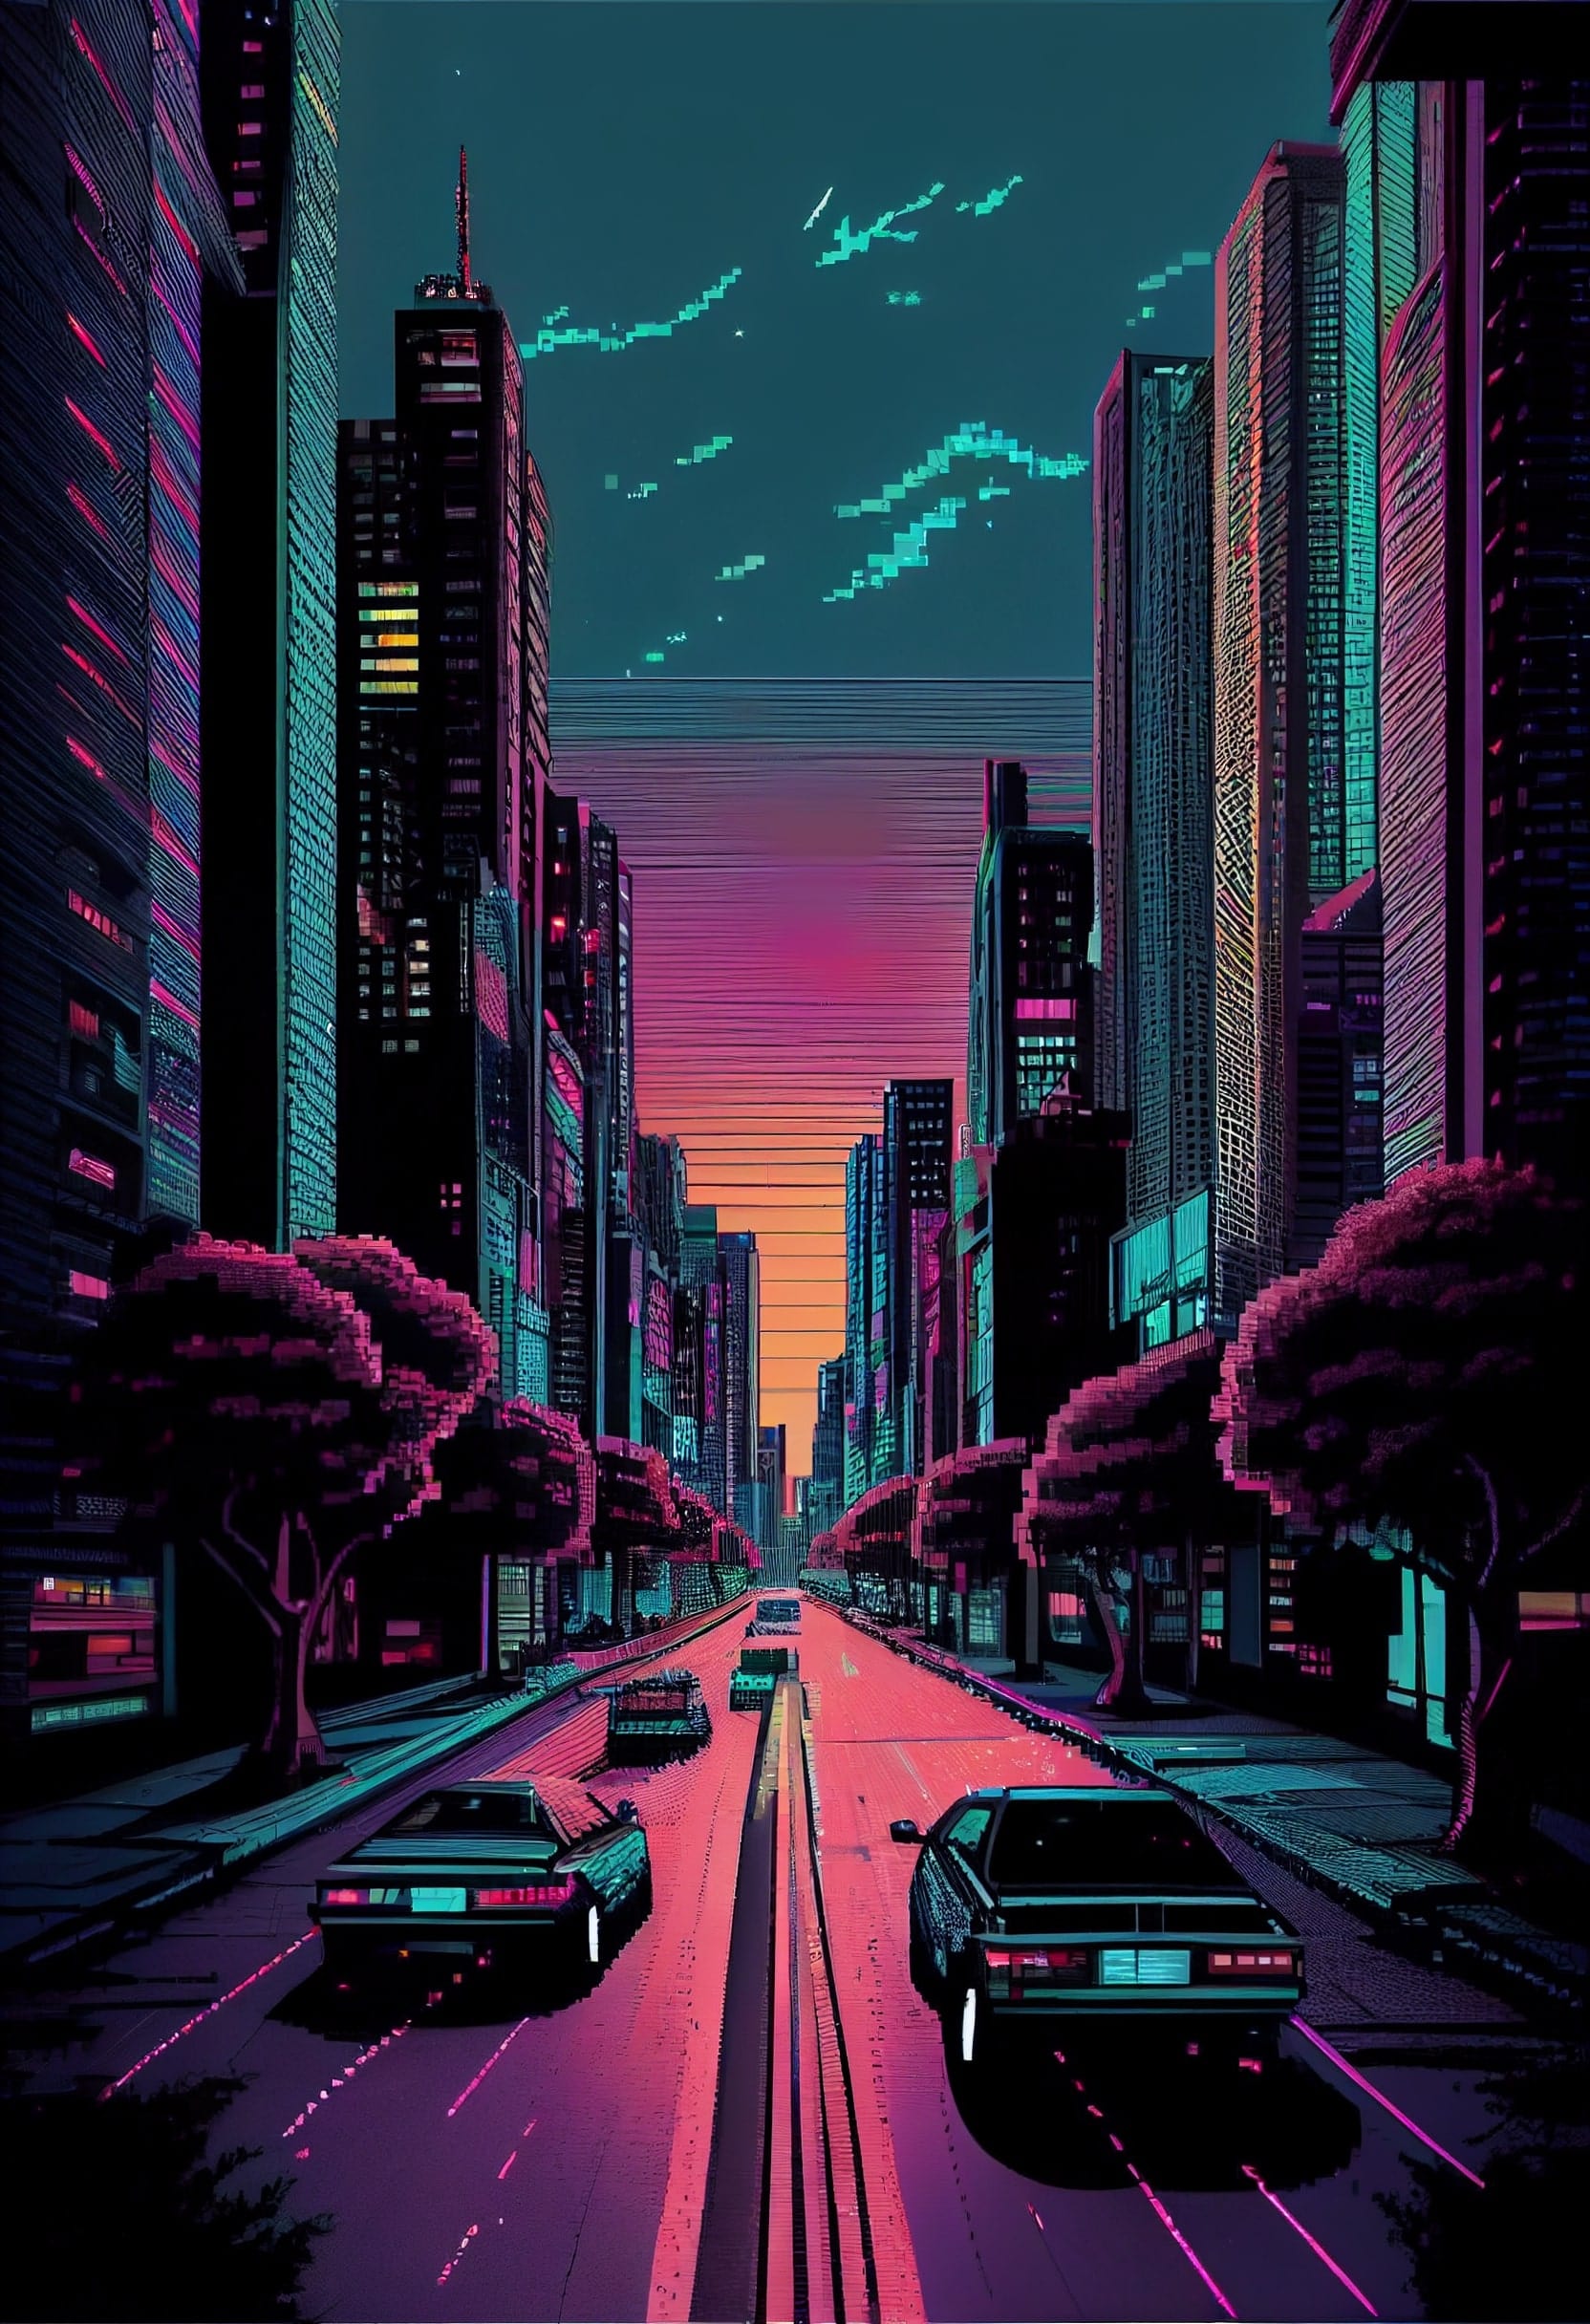 Painting of a city street at night.